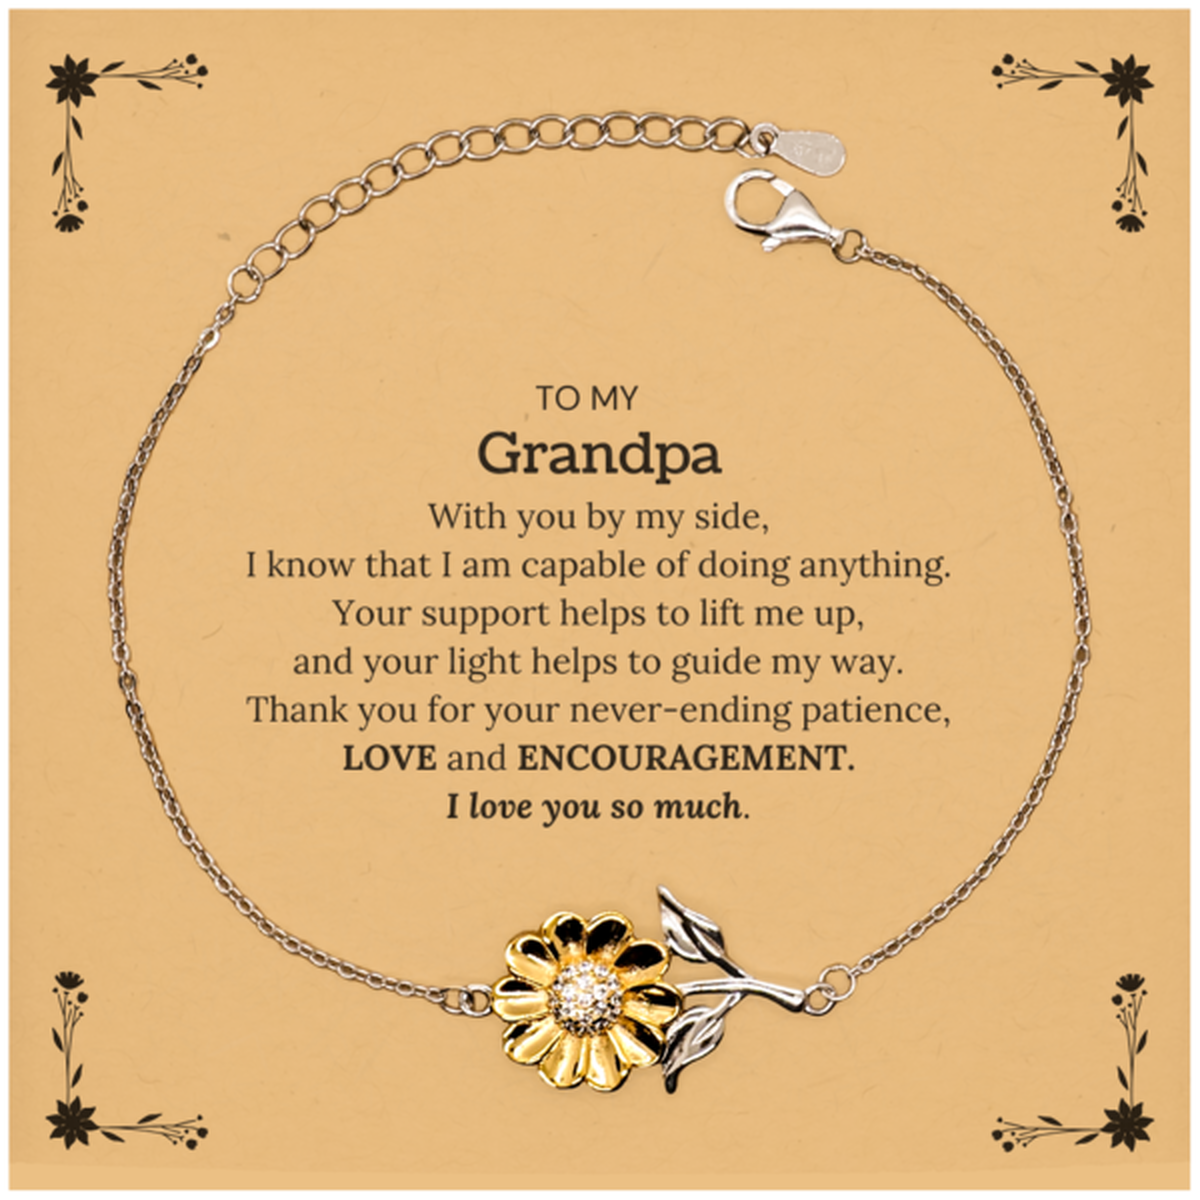 Appreciation Grandpa Sunflower Bracelet Gifts, To My Grandpa Birthday Christmas Wedding Keepsake Gifts for Grandpa With you by my side, I know that I am capable of doing anything. I love you so much